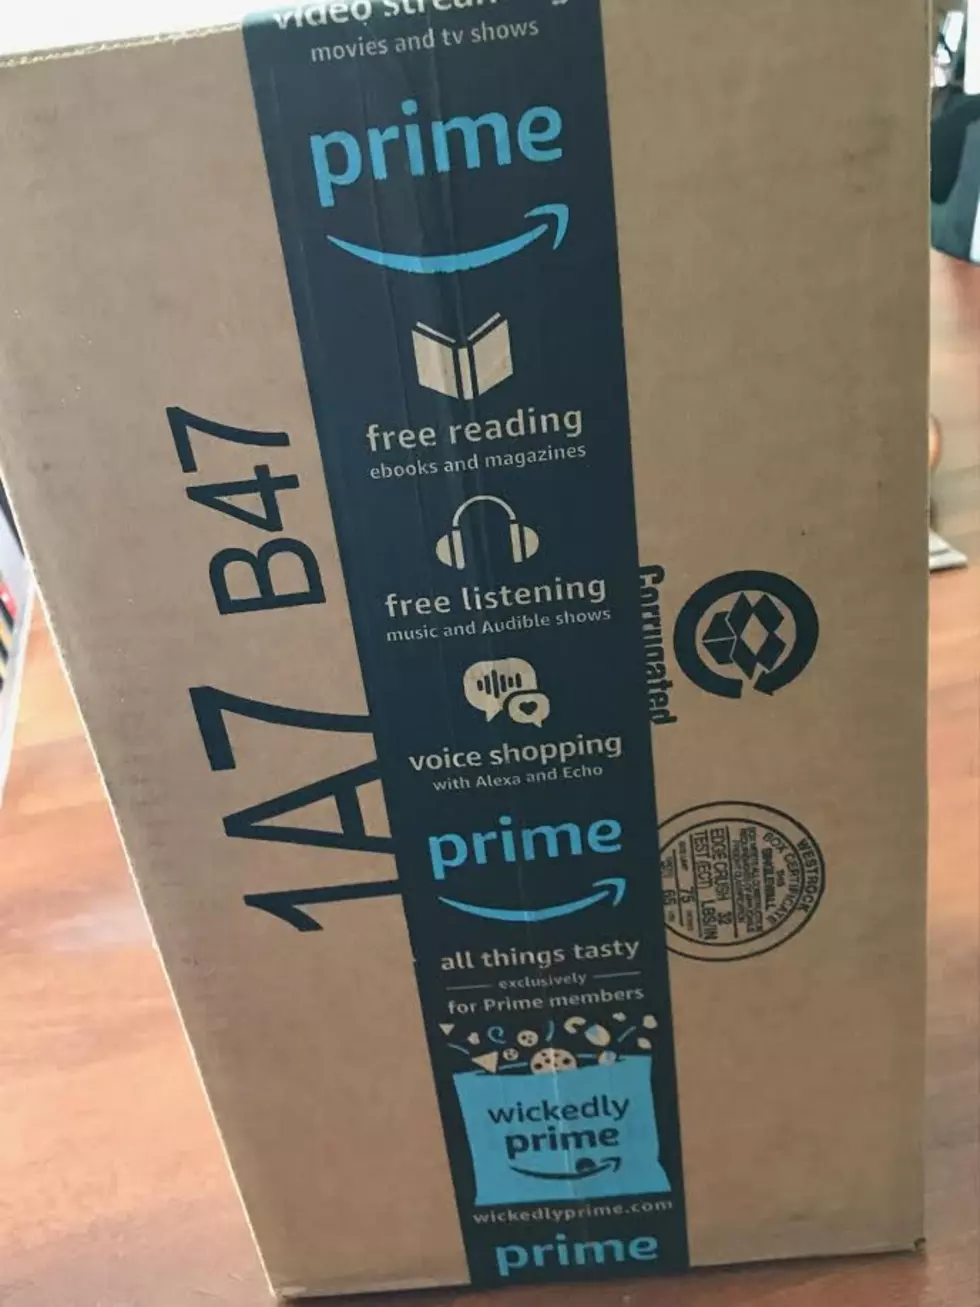 Get Around The Amazon Prime Rate Hike